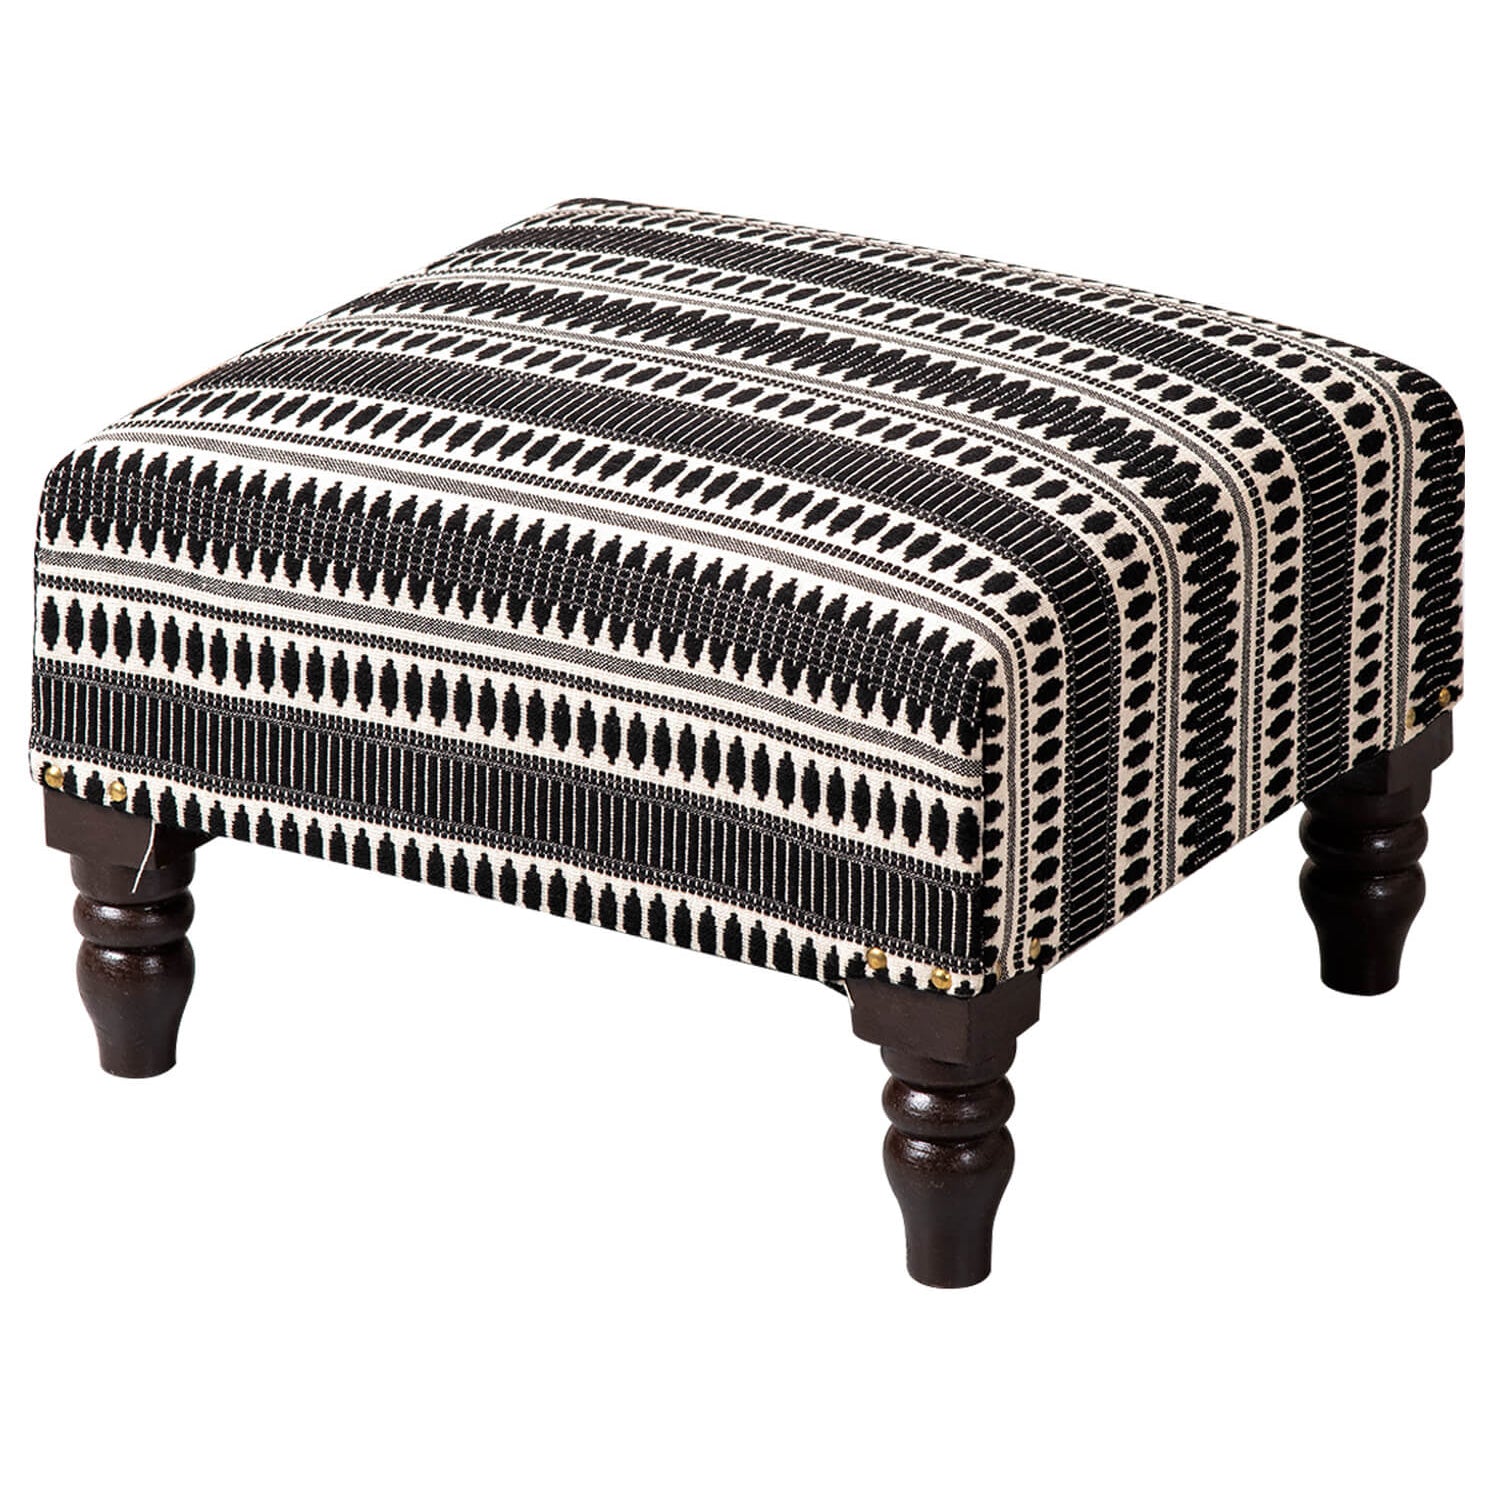 Bohemian Jacquard Wooden Footrests in Black & White Color Set of 2